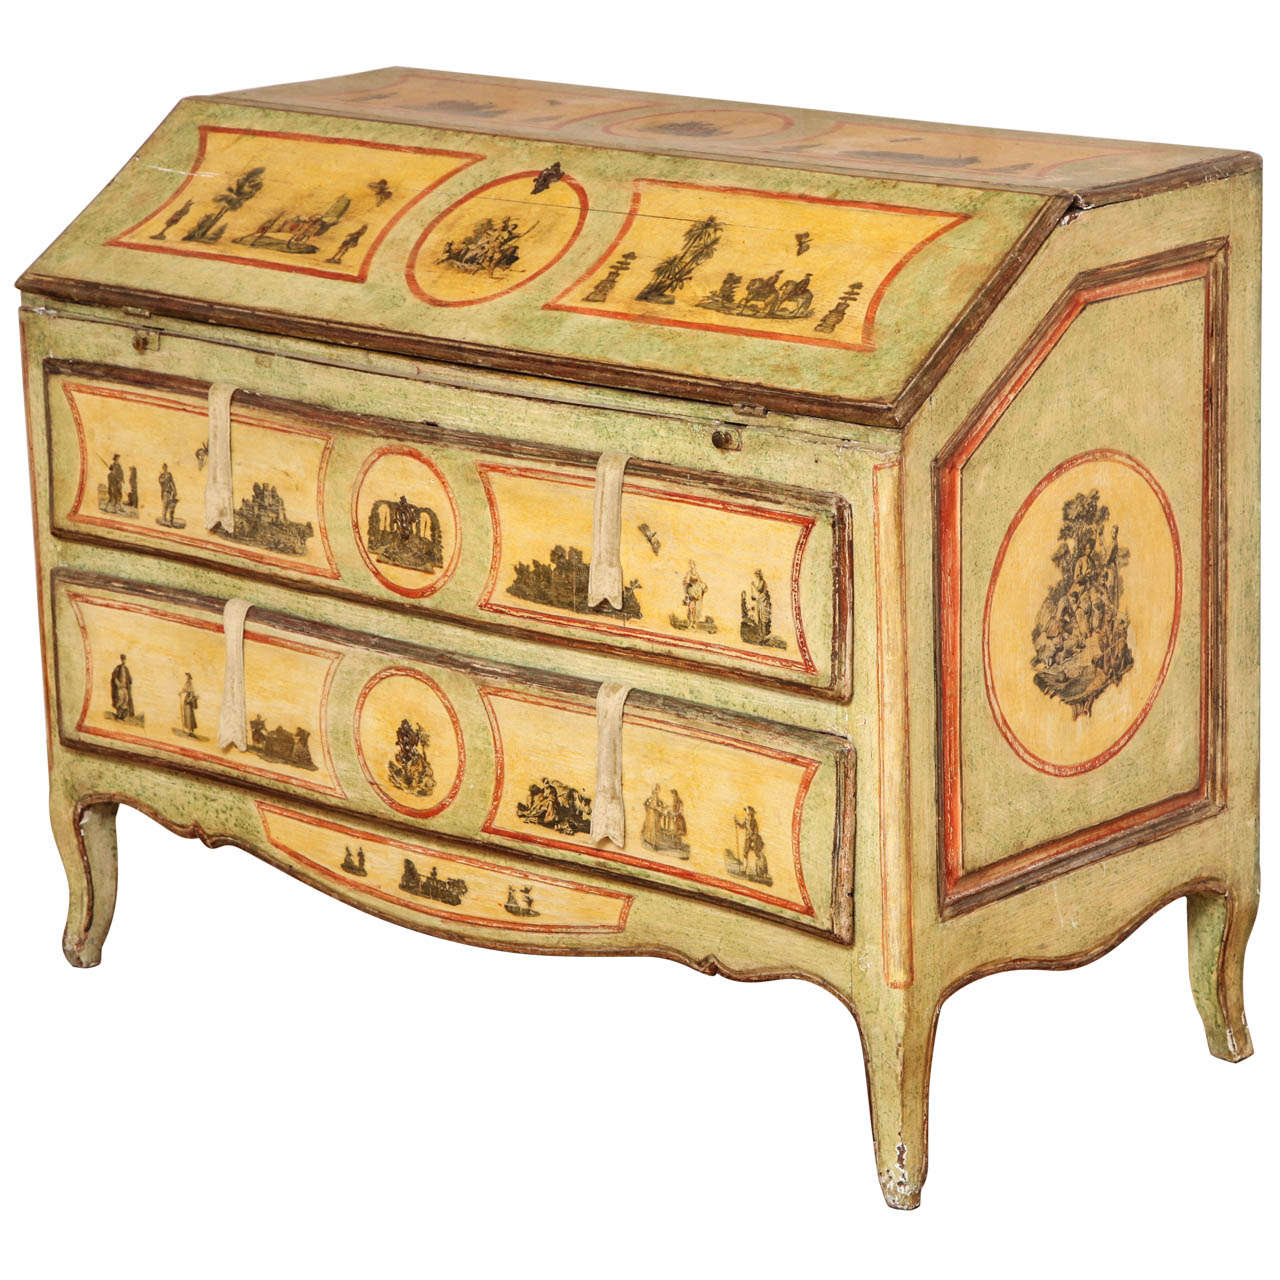 A 19th Century Painted and Decoupage Secretary For Sale